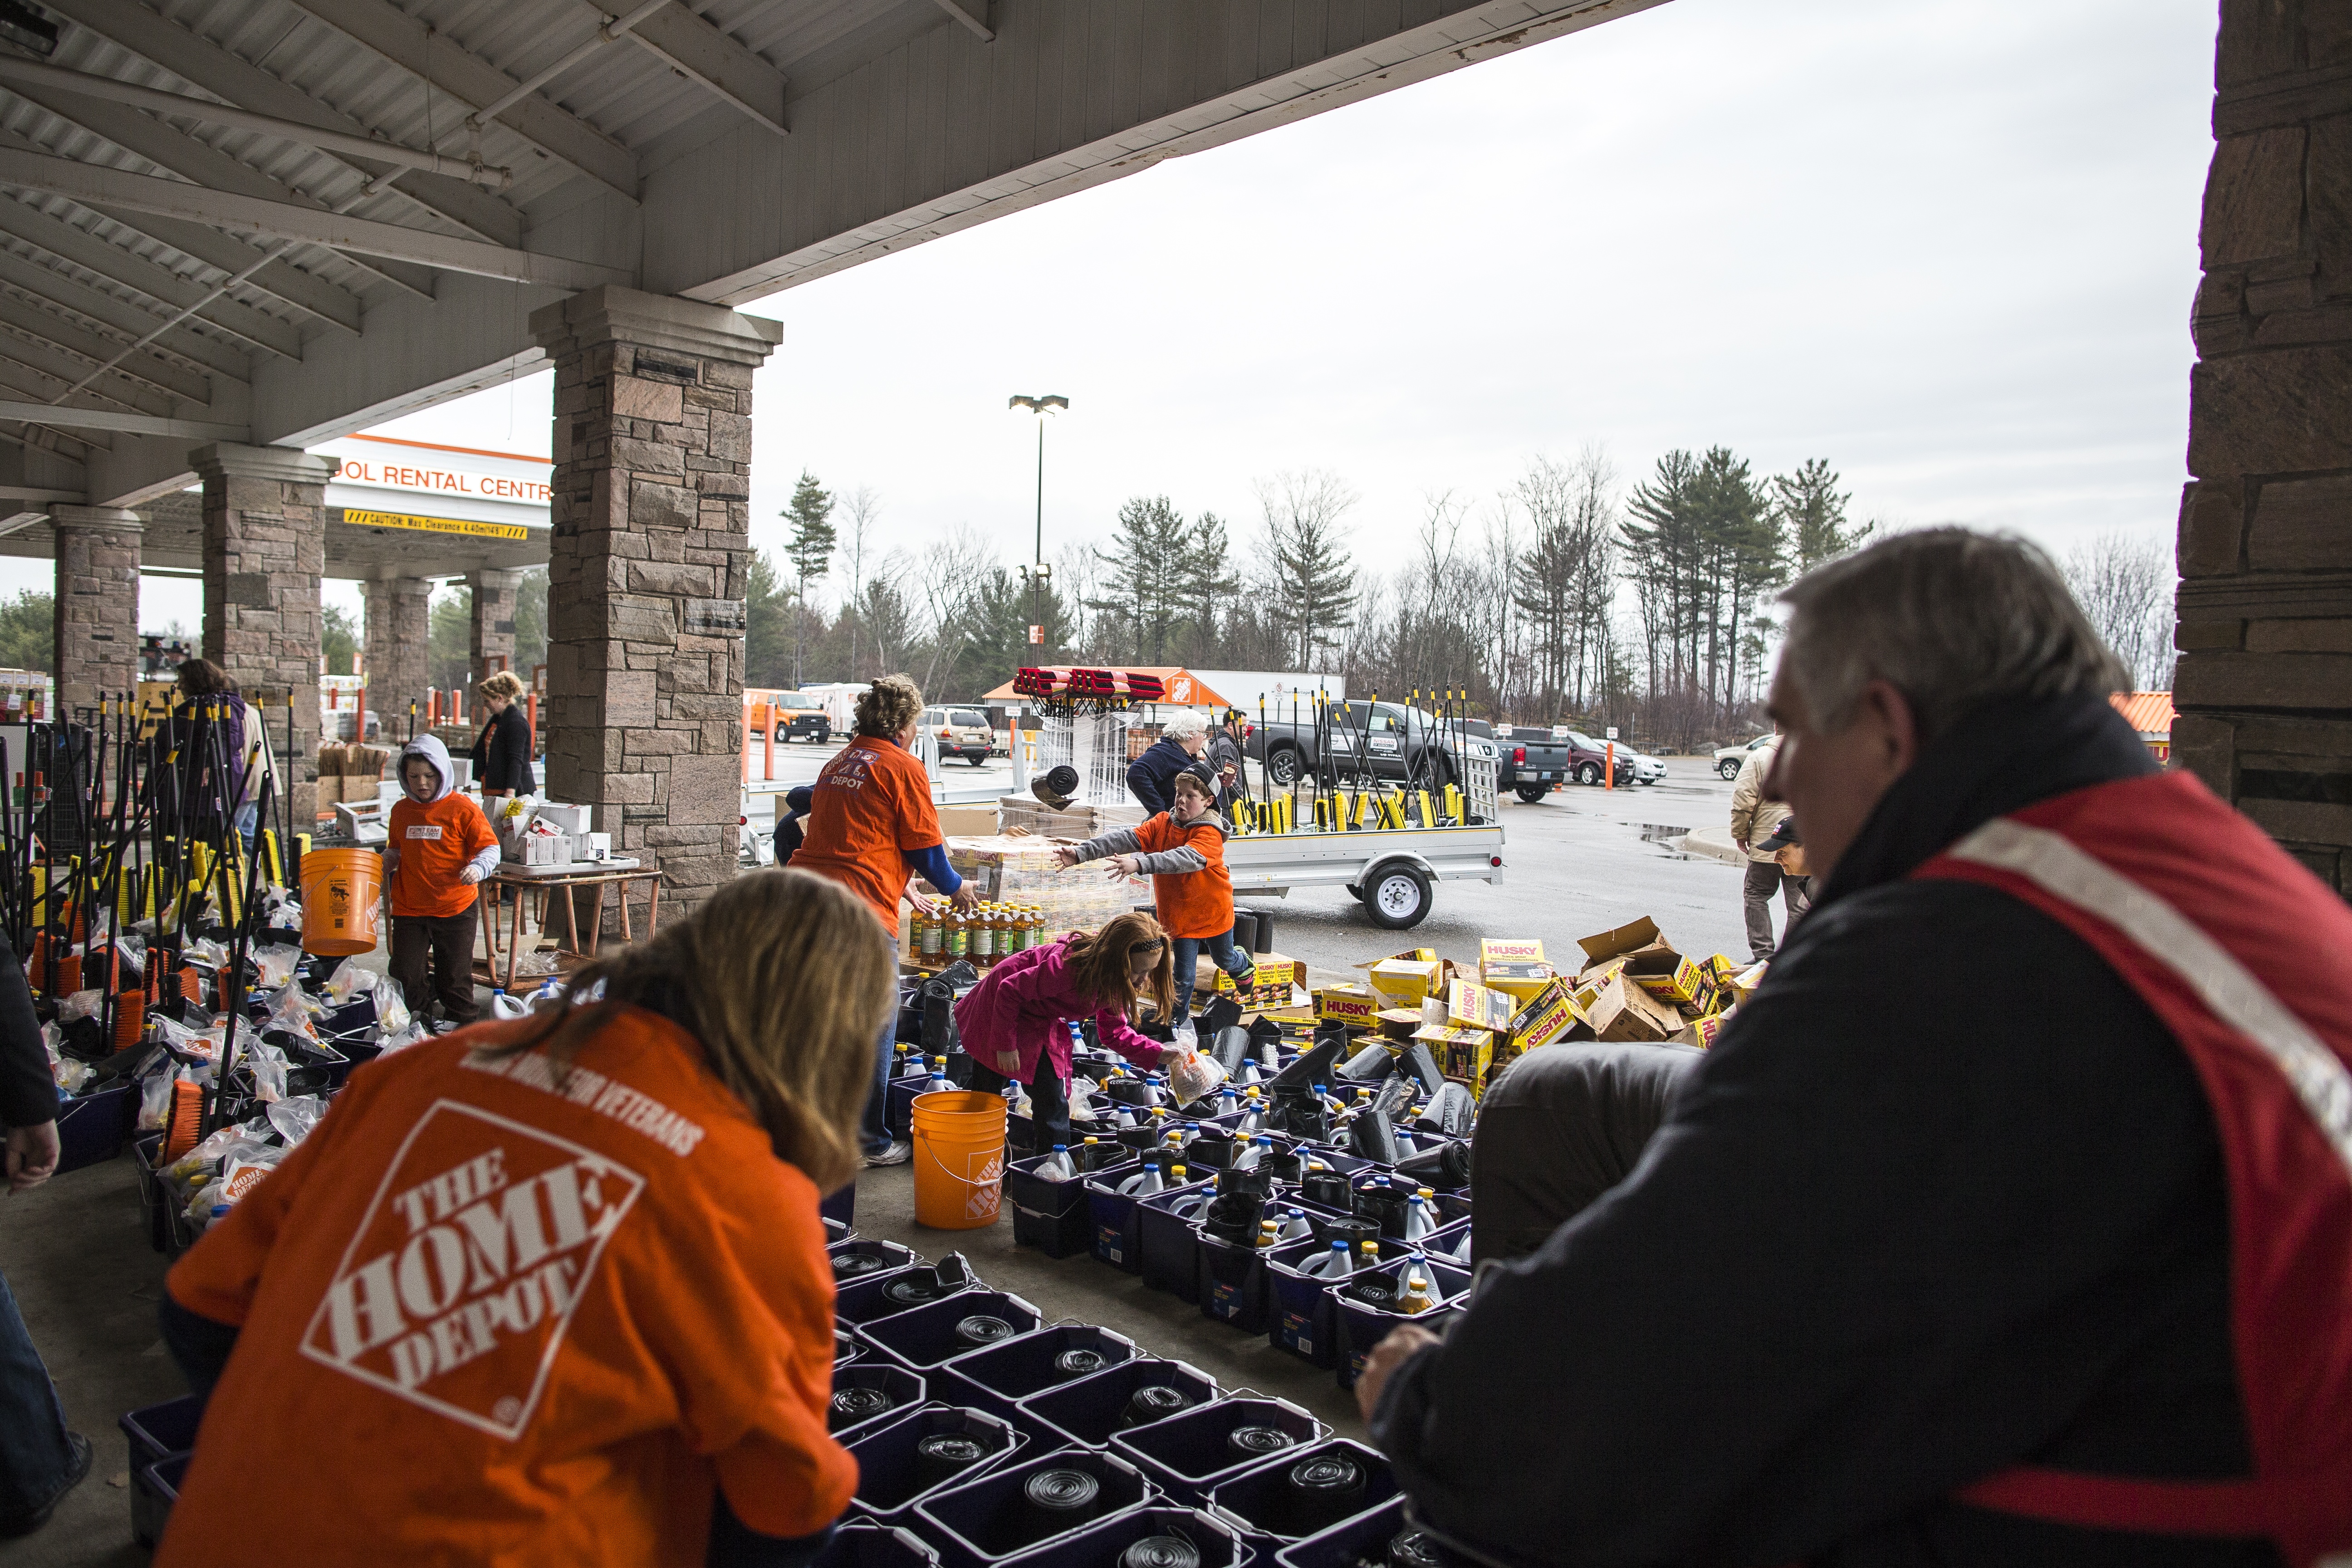 Assembling clean-up kits at The Home Depot in Bracebridge to assist families affected by flooding.